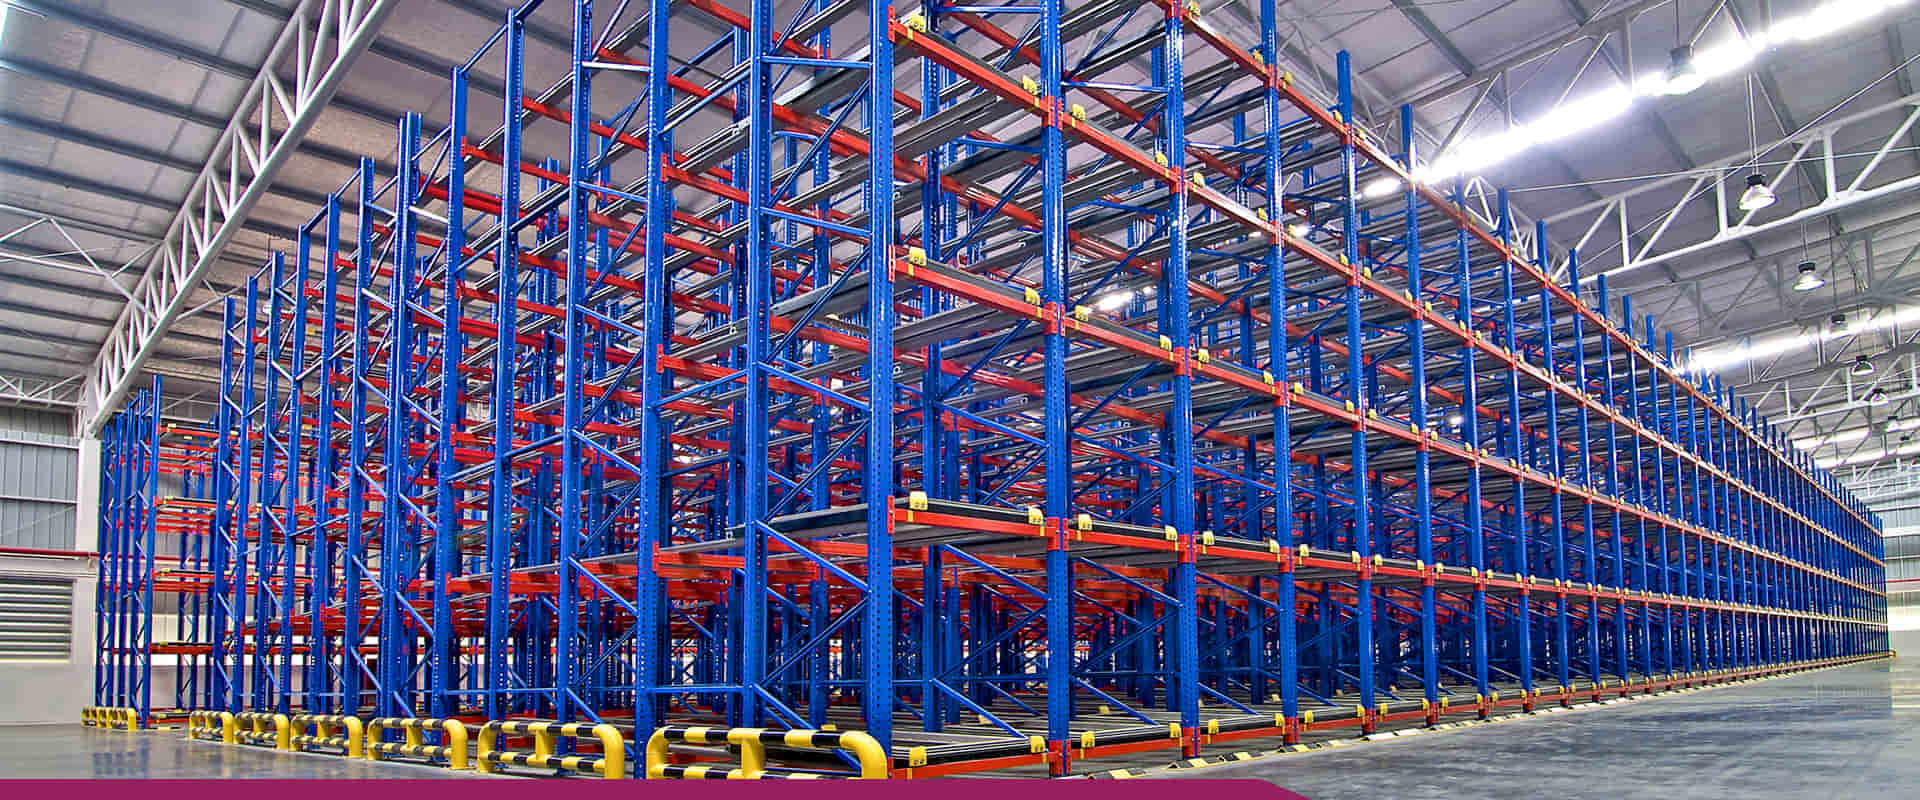 India’s Top Warehouse And Industrial Storage Racks Manufacturer In Ajmer